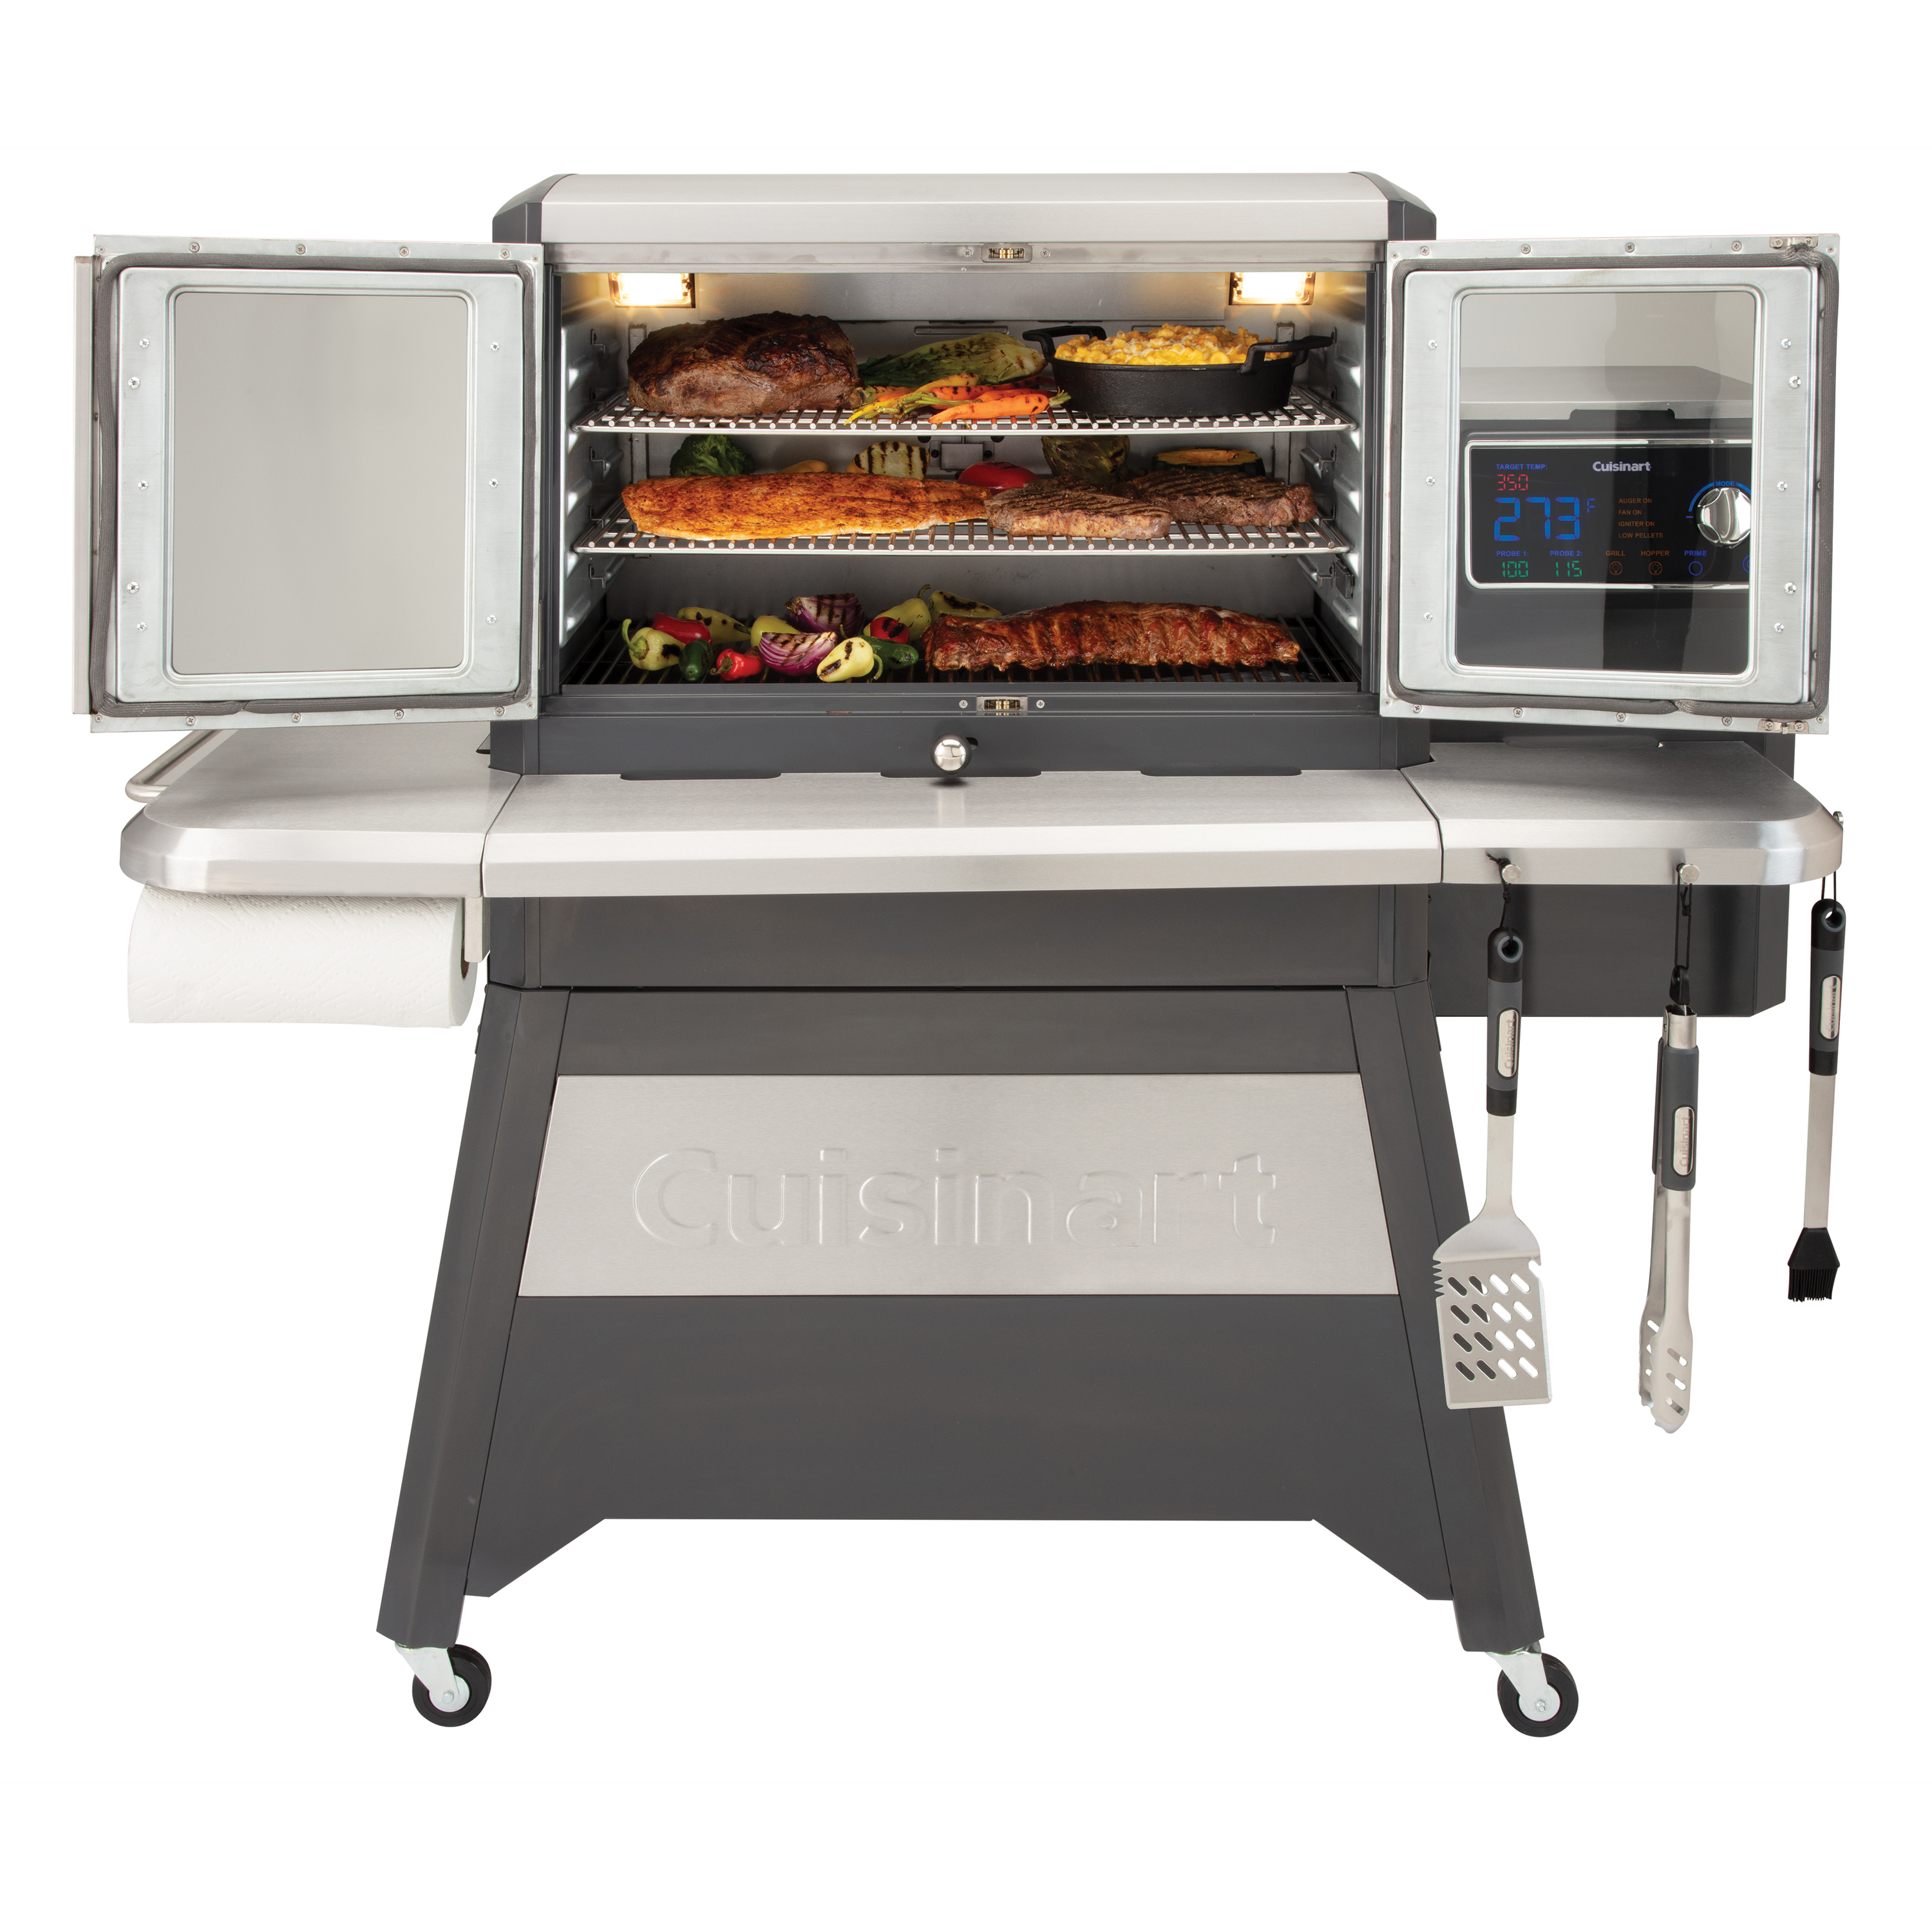 Cuisinart Clermont Pellet Grill & Smoker - image 4 of 37